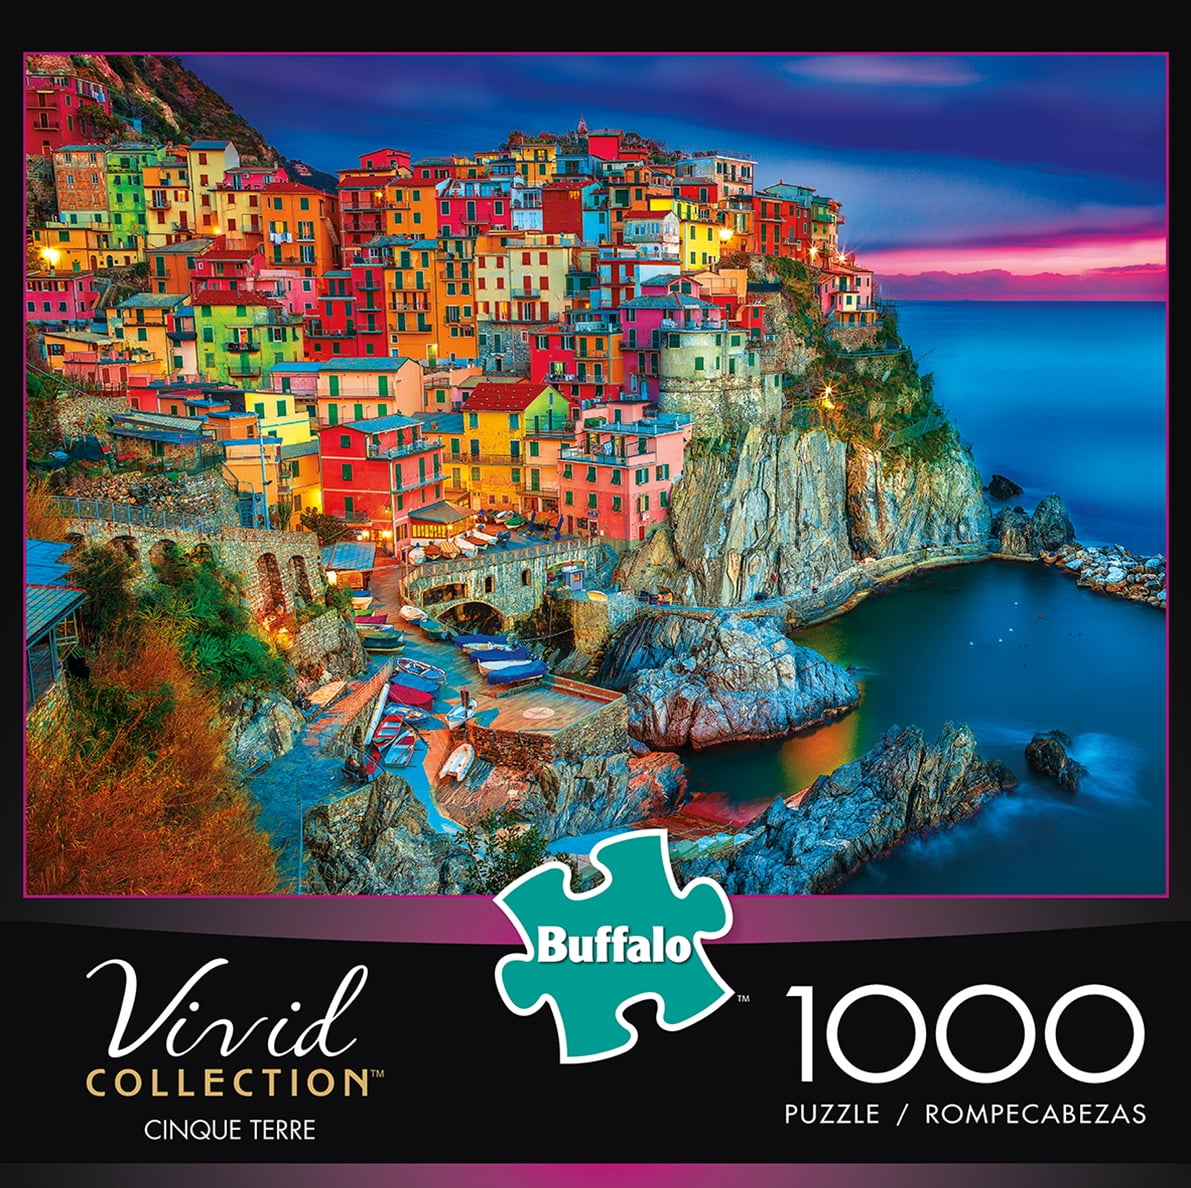 1000 Piece puzzle Buffalo Games CINQUE TERRE ITALY Factory Sealed QUALITY! 